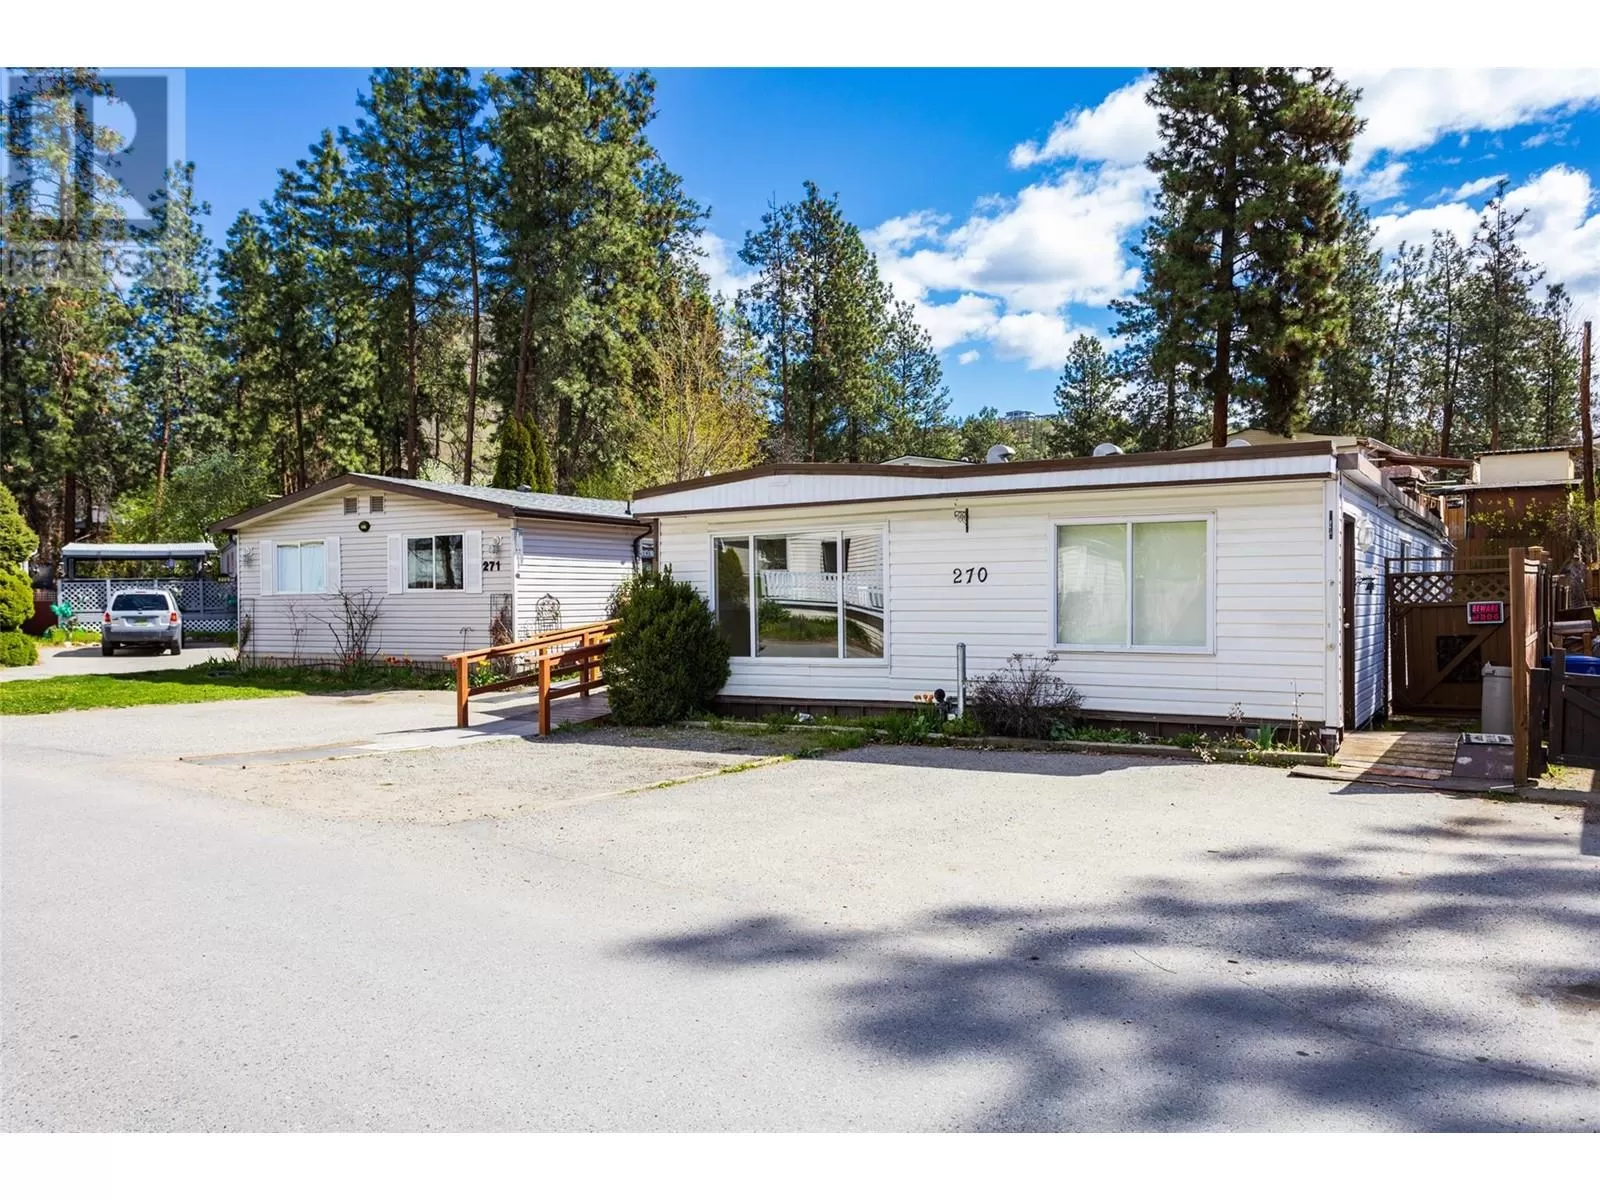 Manufactured Home for rent: 1999 Highway 97 S Unit# 270, West Kelowna, British Columbia V1Z 1B2